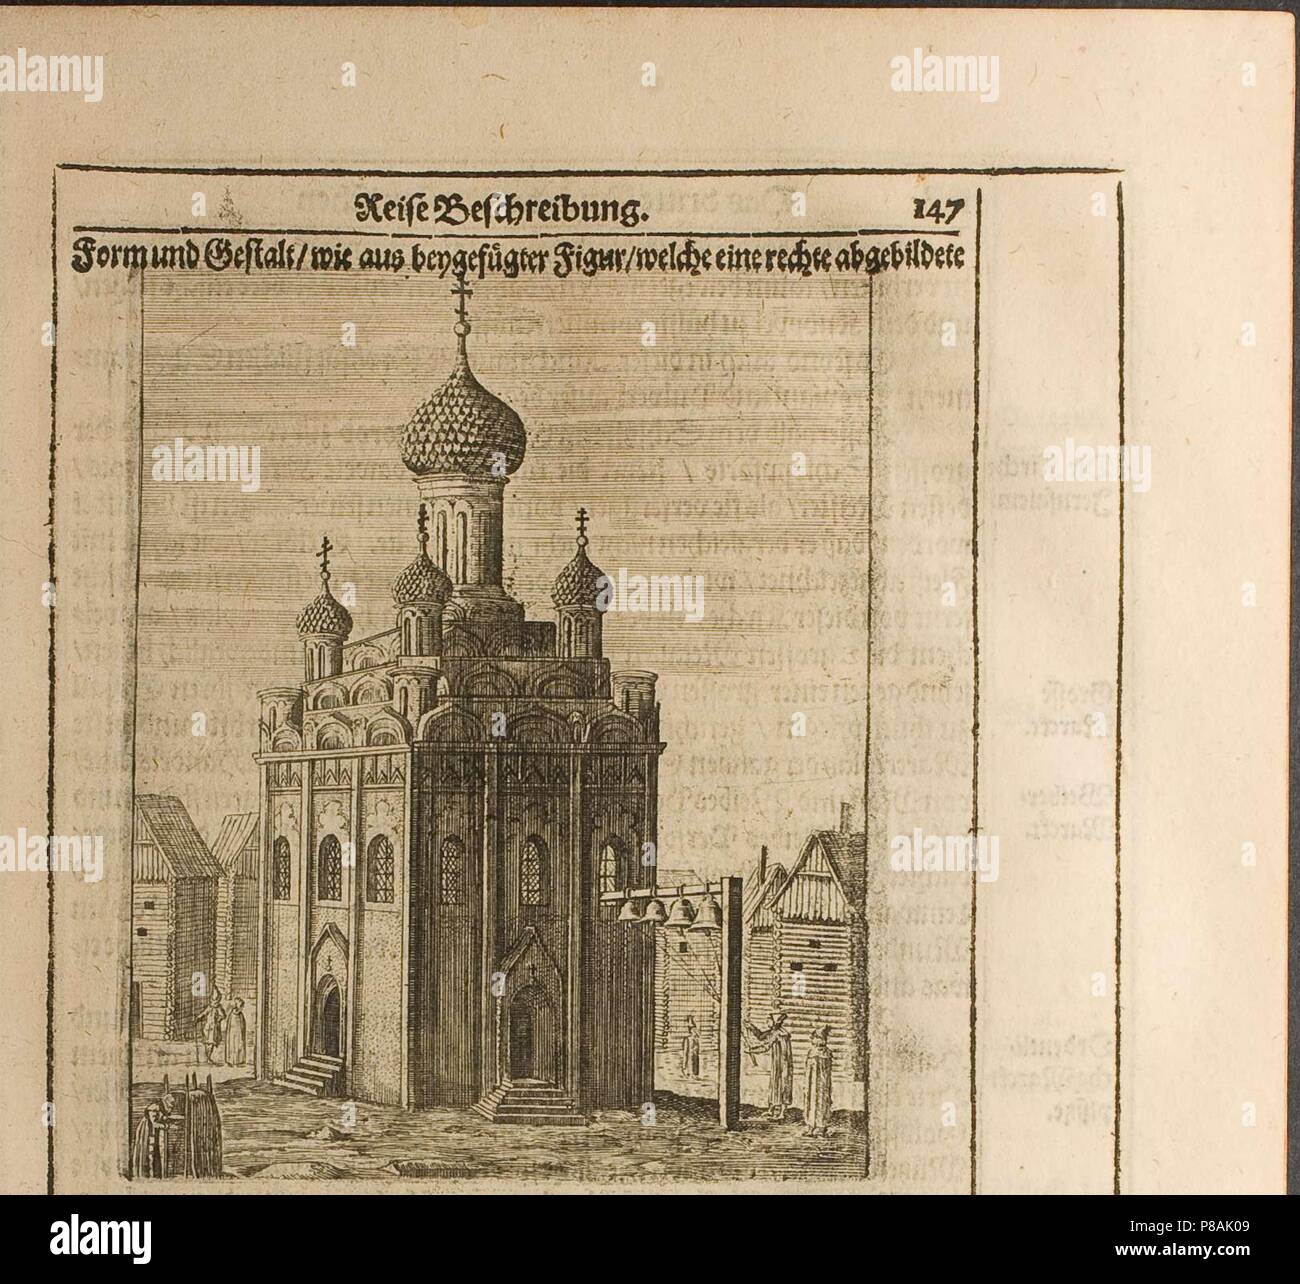 Cathedral in the Moscow Kremlin (Illustration from 'Travels to the Great Duke of Muscovy and the King of Persia' by Adam Oleariu. Museum: PRIVATE COLLECTION. Stock Photo